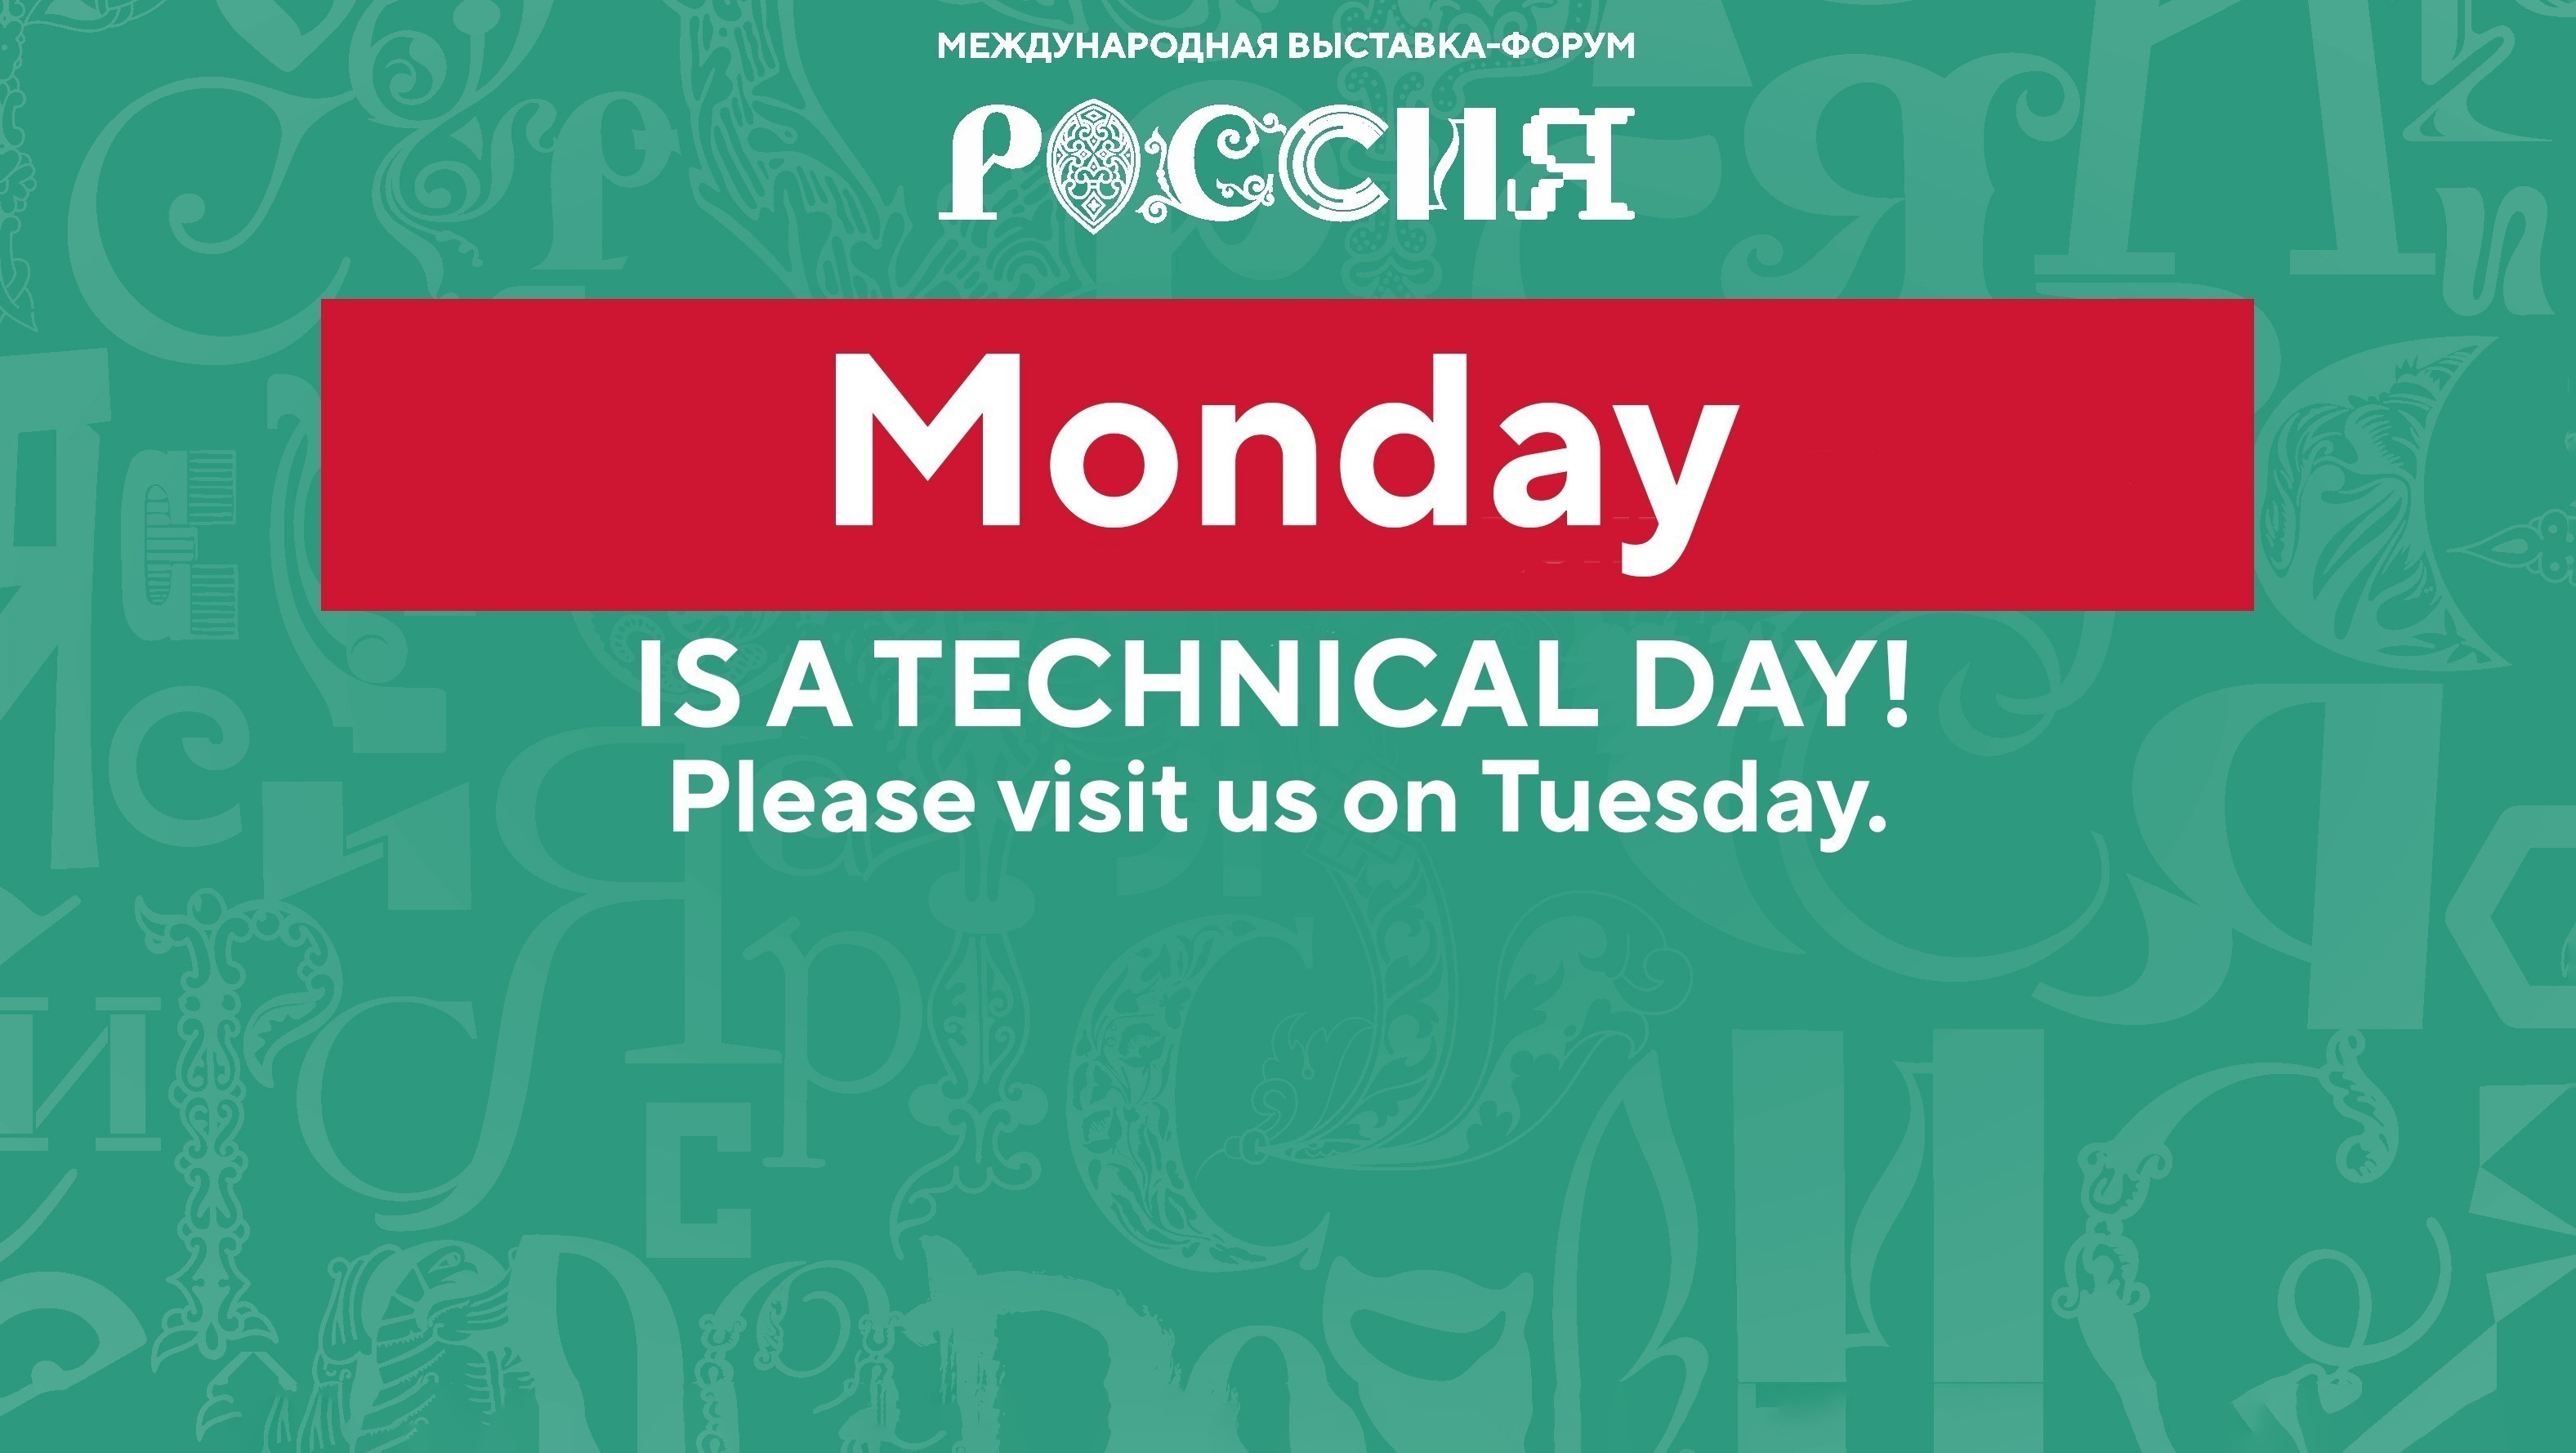 Monday, July 1 is a technical day